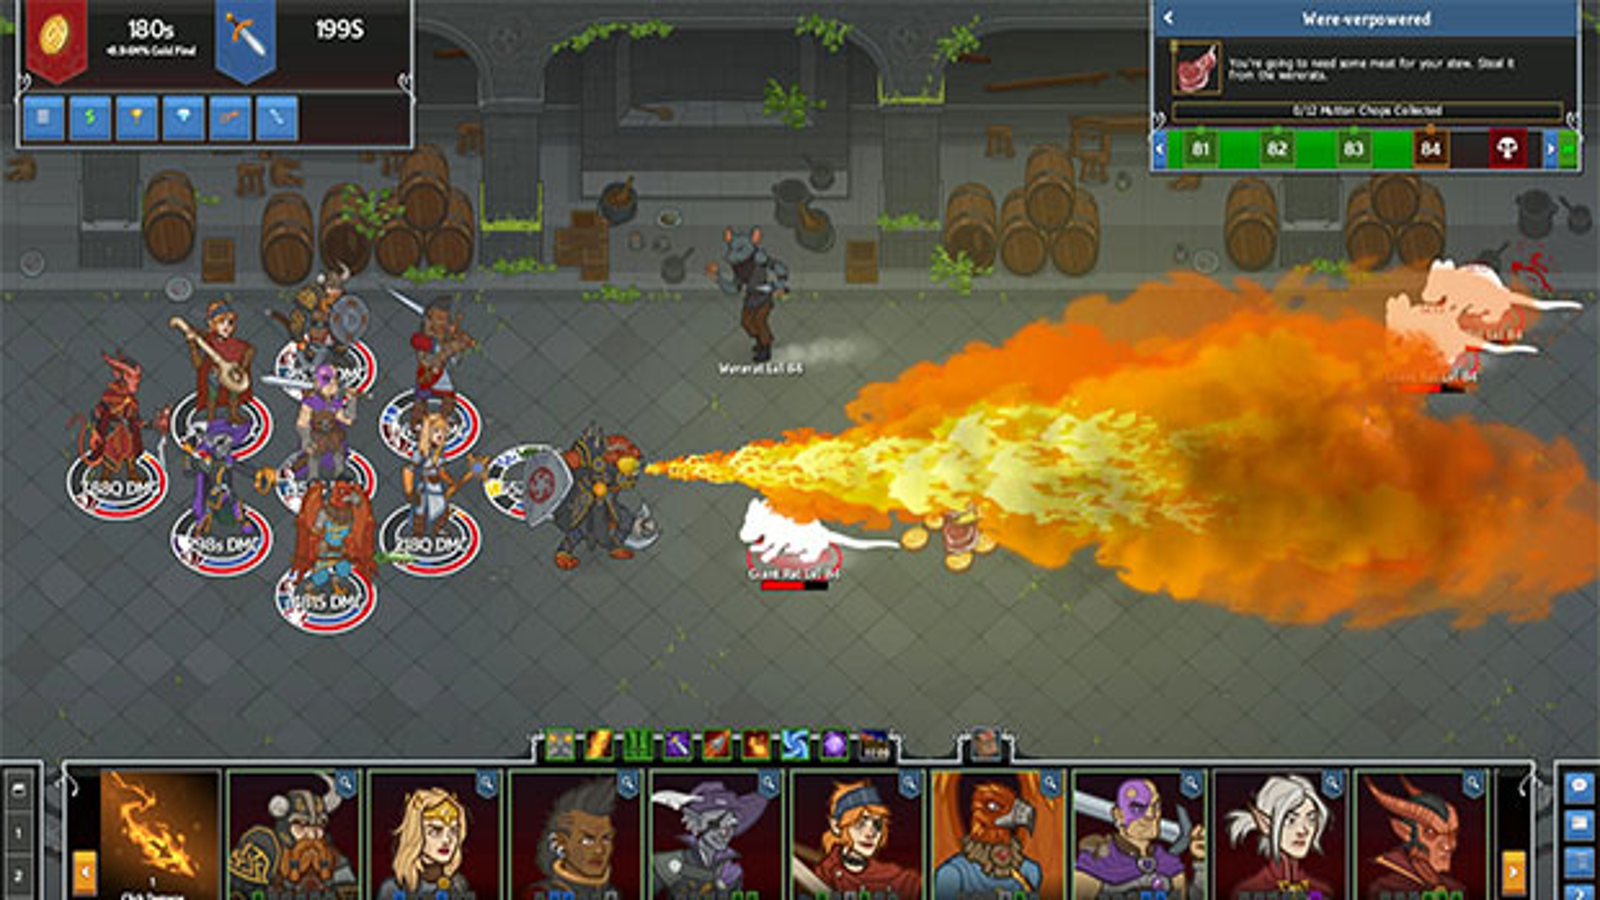 The Best Idle Games And Clicker Games On PC 